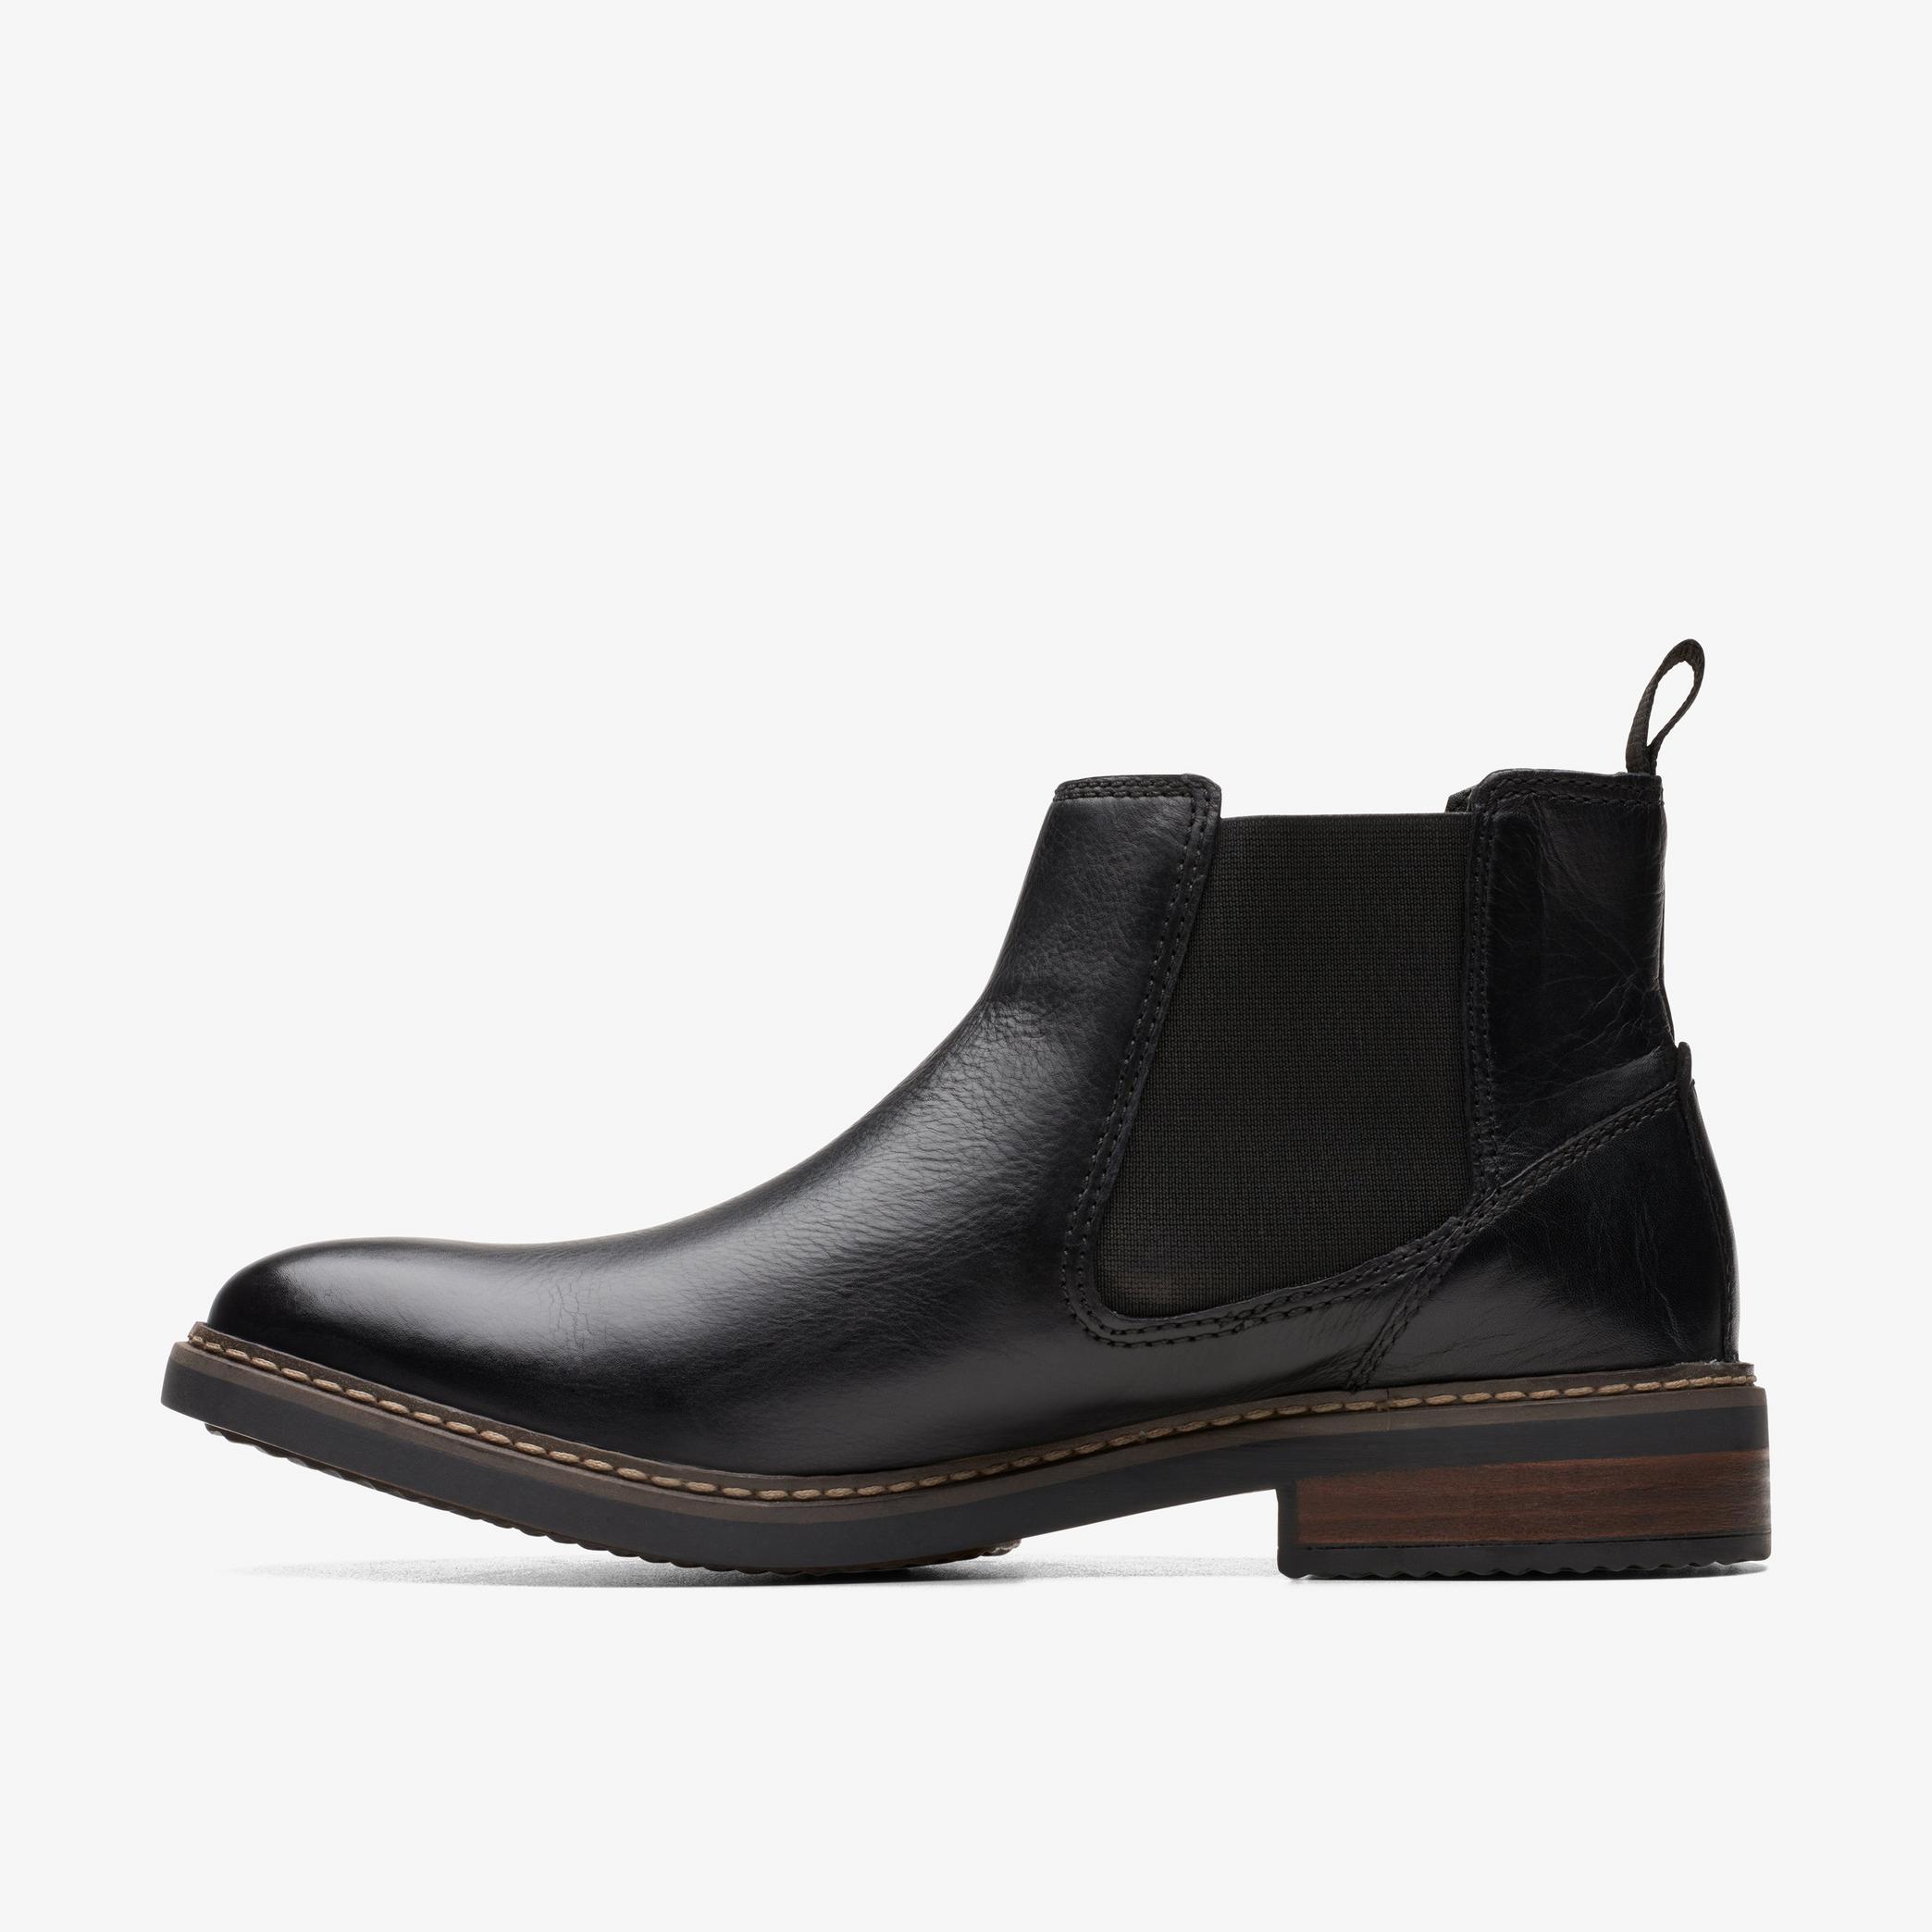 Blackford Top Black Leather Chelsea Boots, view 2 of 6